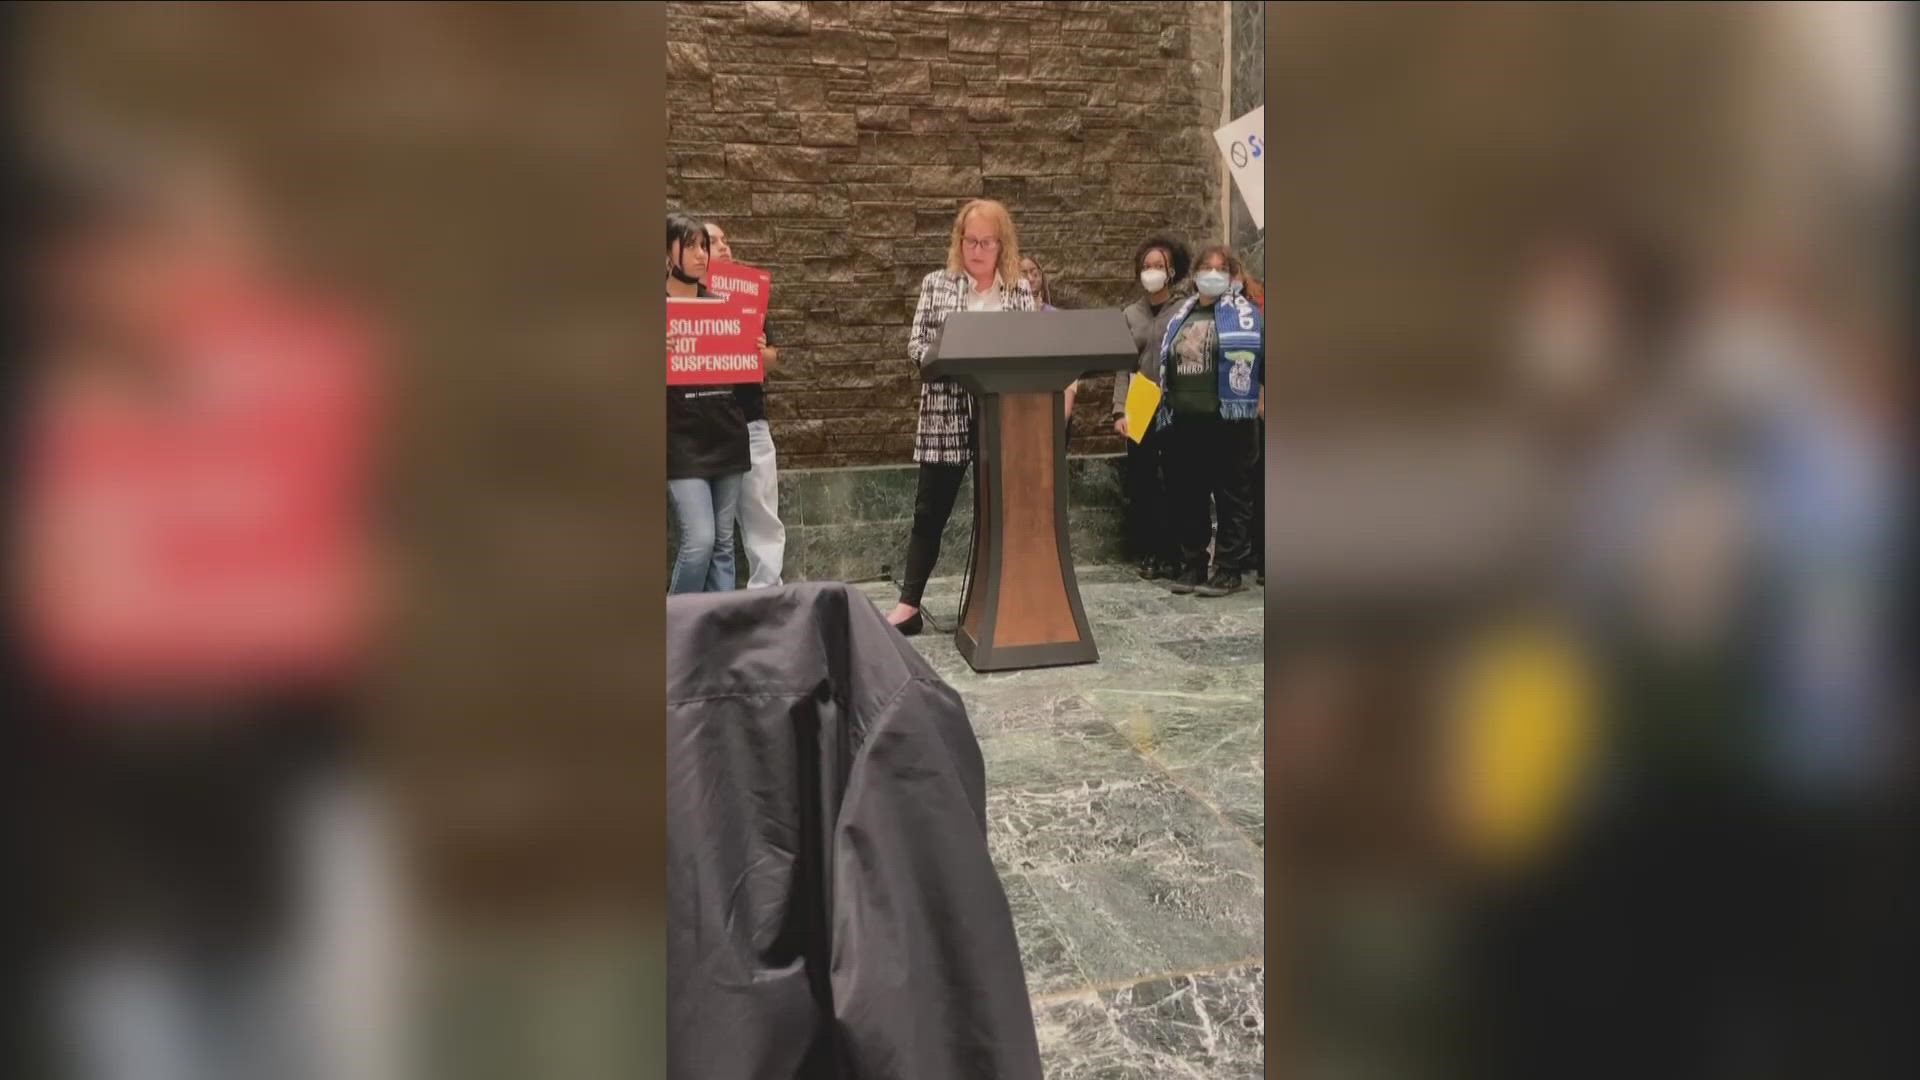 Solutions not suspensions rally in Albany today